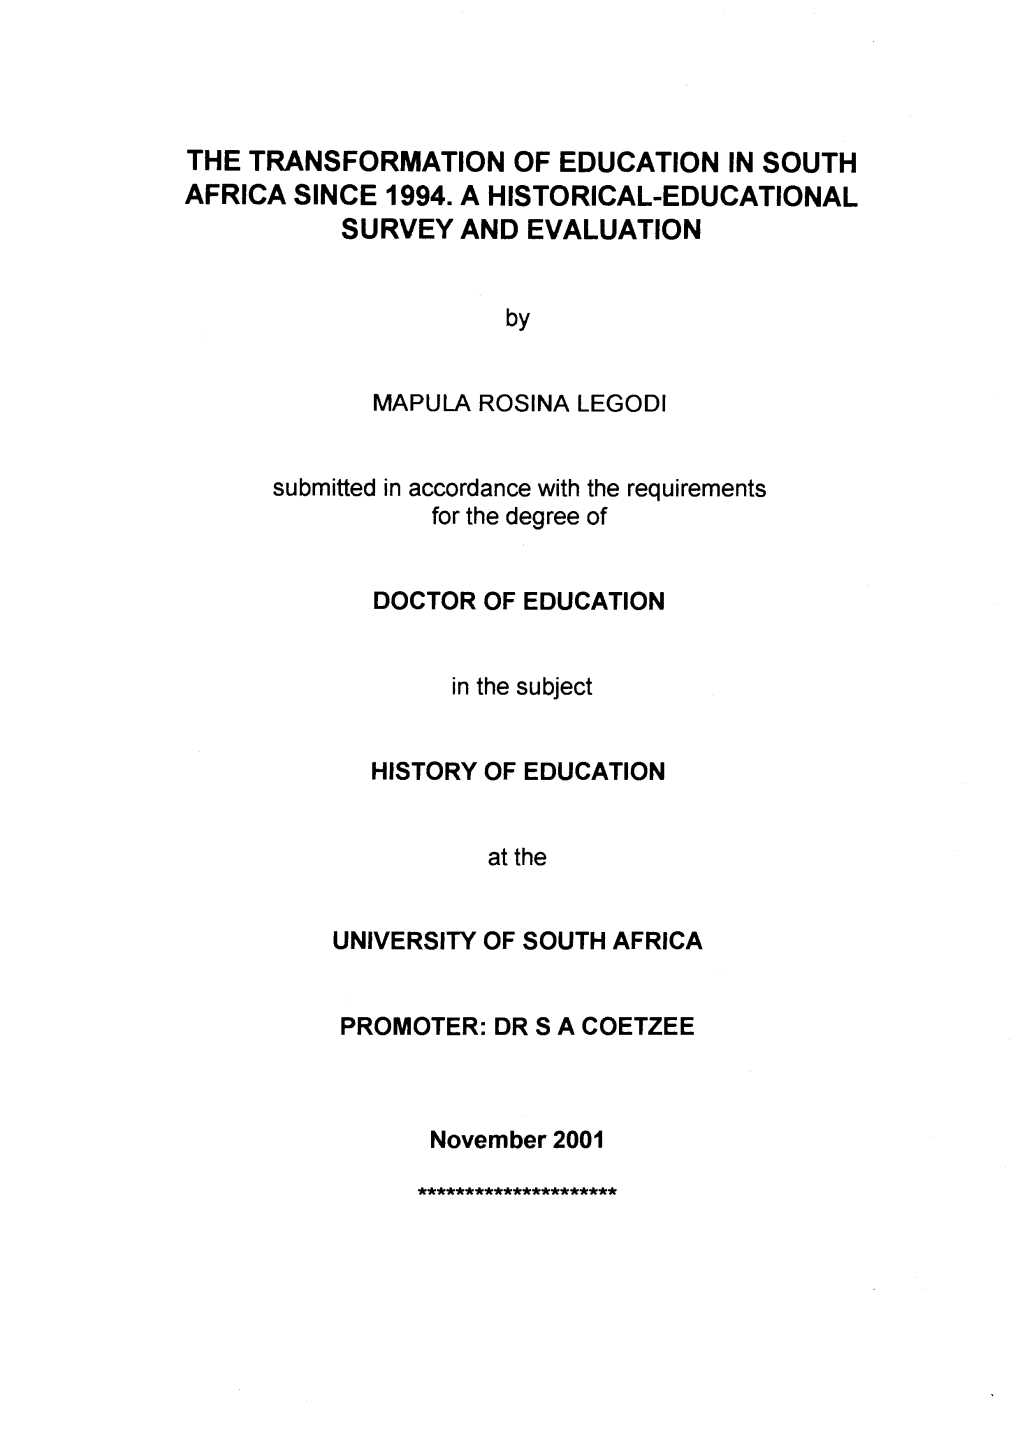 The Transformation of Education in South Africa Since 1994. a Historical-Educational Survey and Evaluation